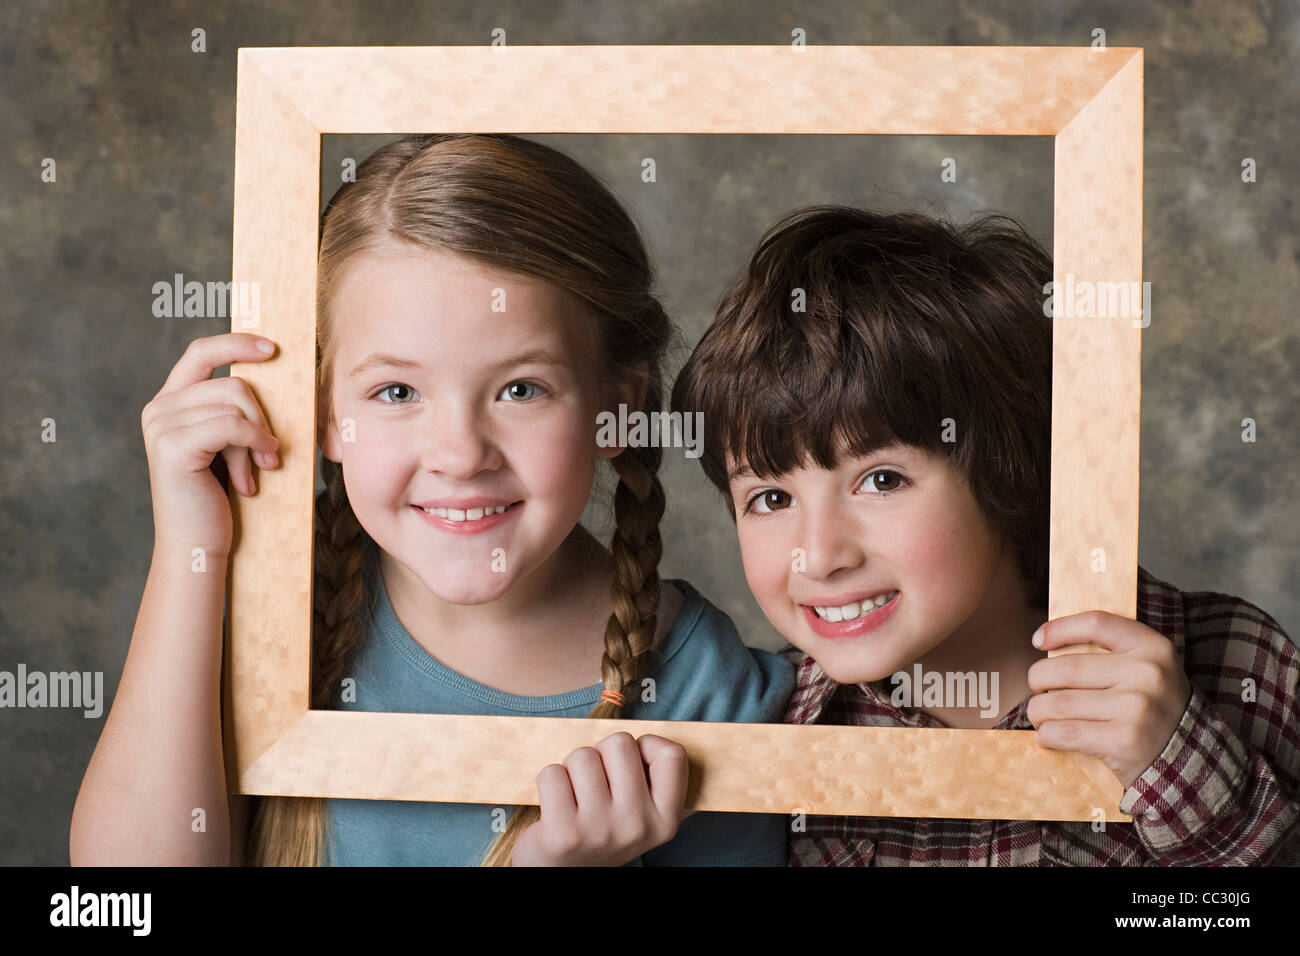 Portrait of girl (8-9) and boy (6-7) looking through frame, studio shot Stock Photo